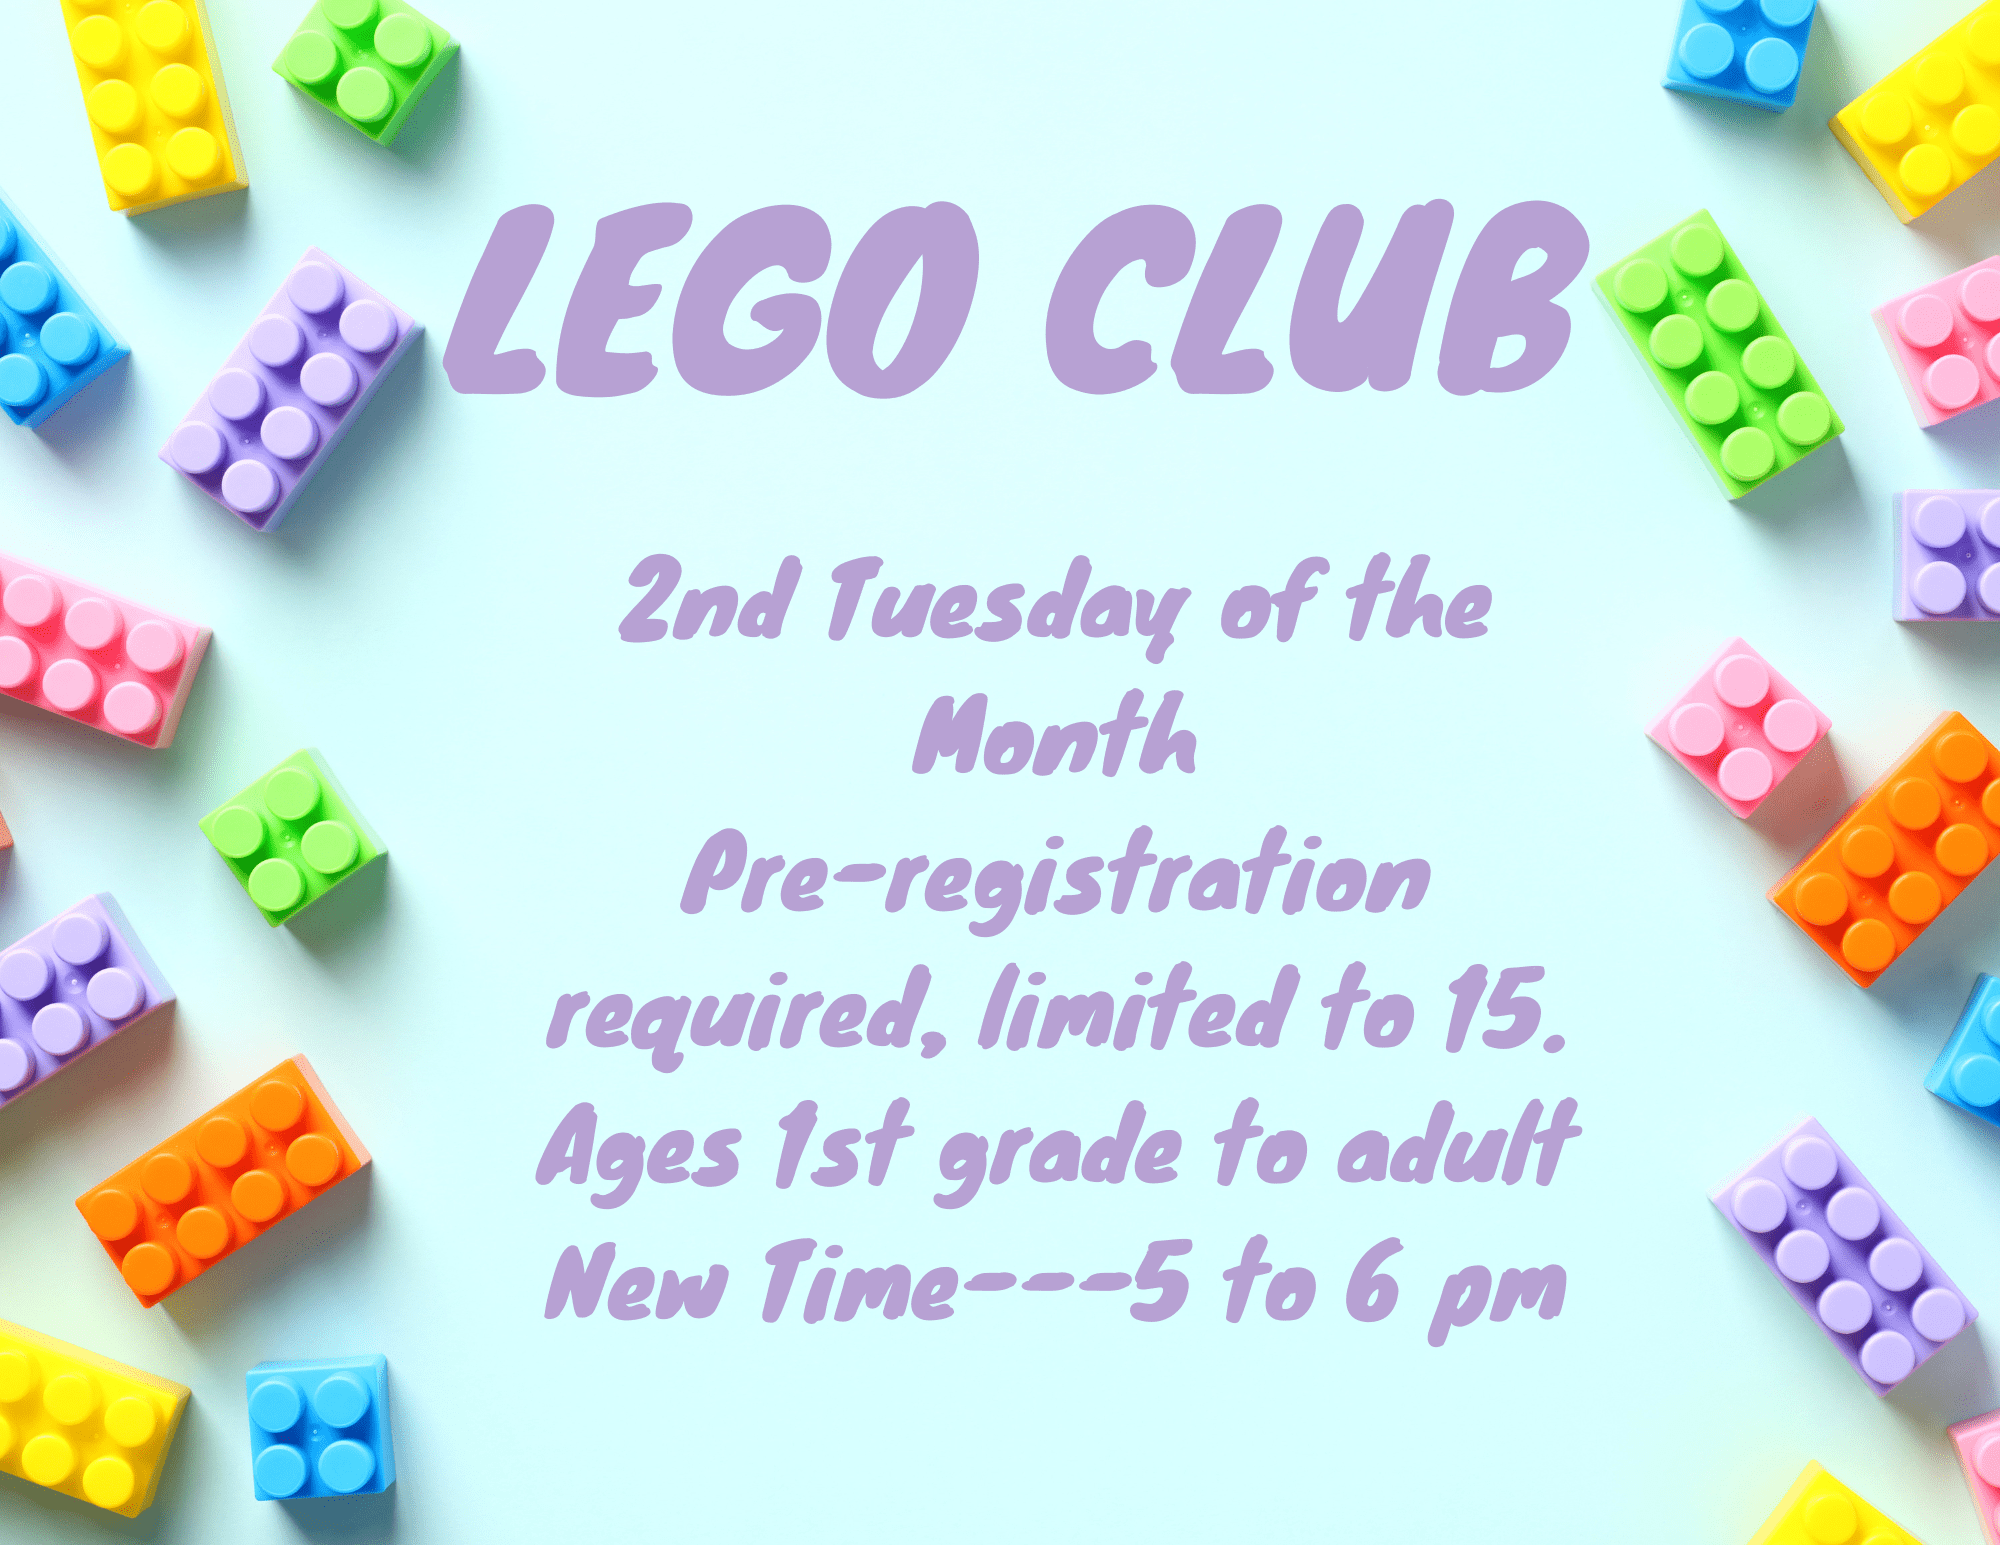 Lego Club 2nd Tuesday of the month